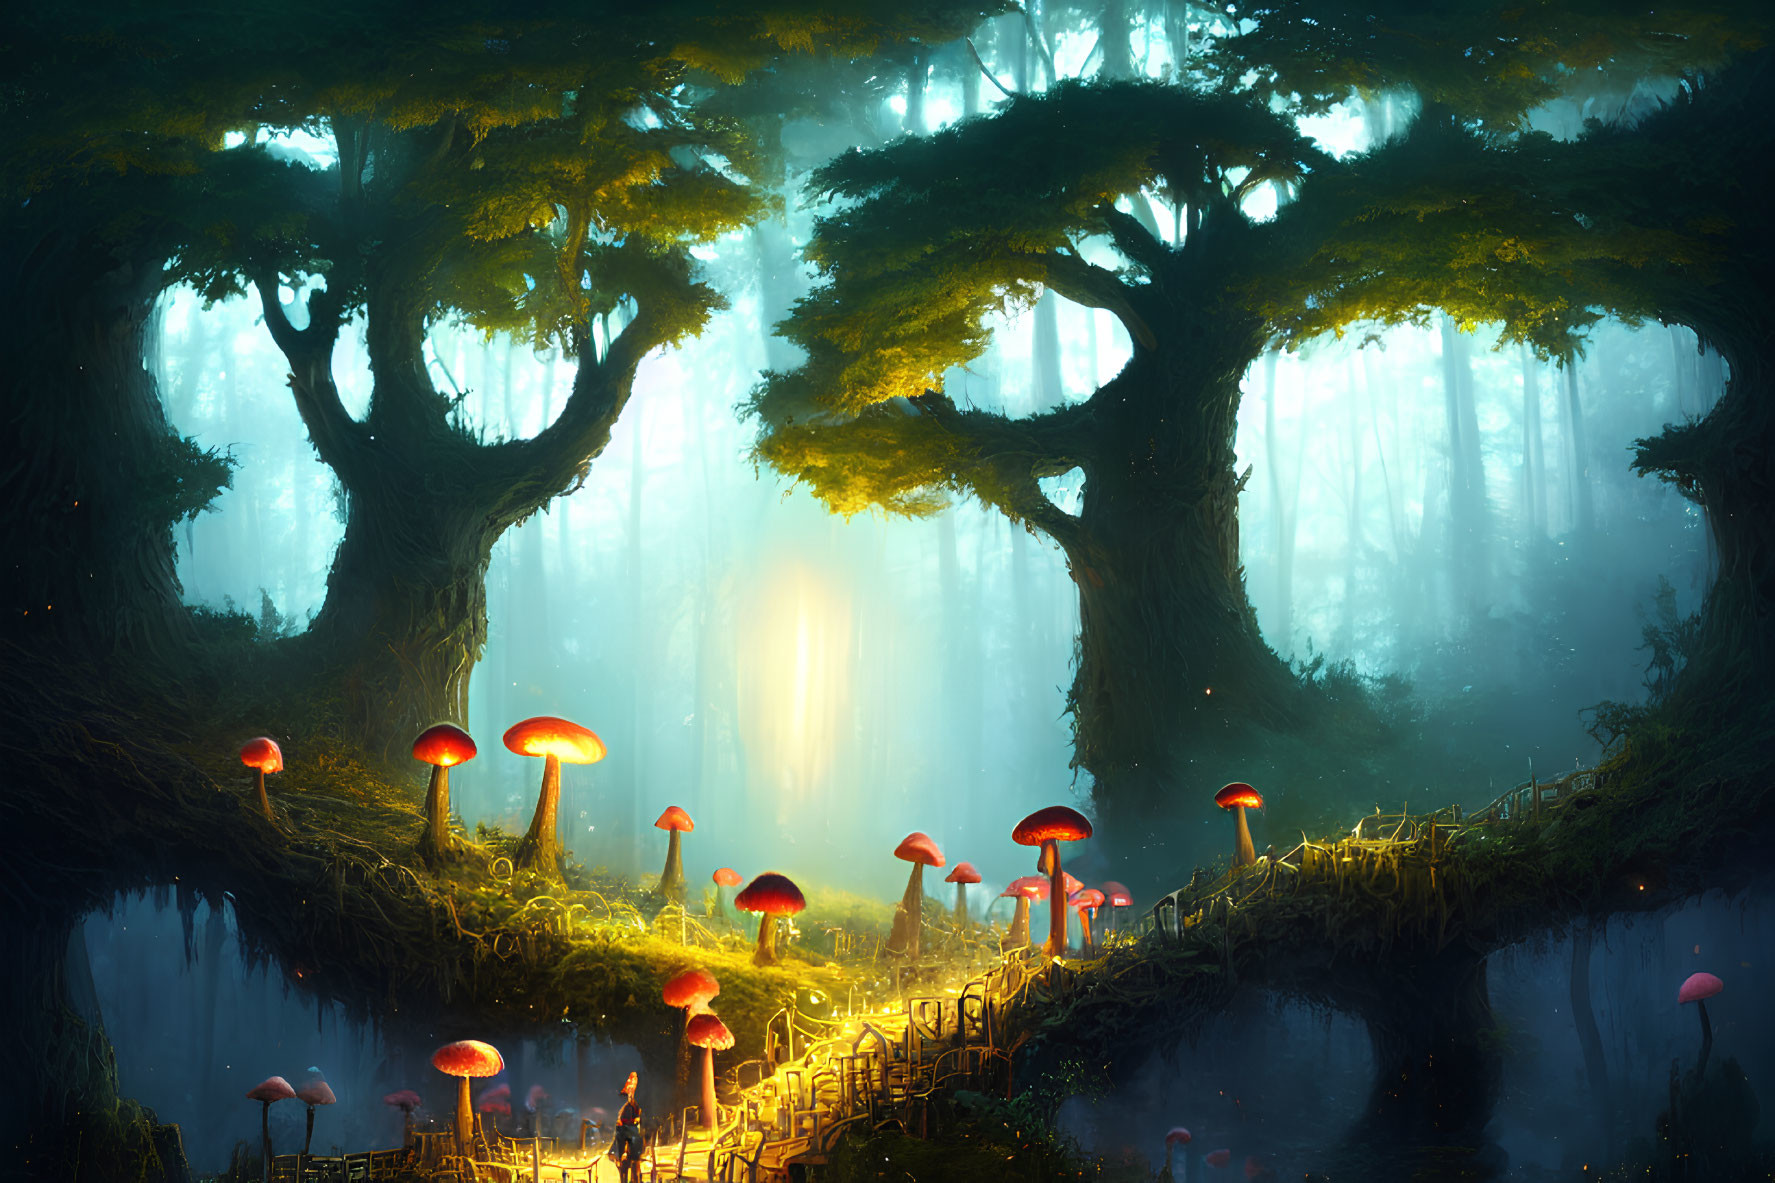 Enchanting forest scene with towering trees, glowing light, oversized mushrooms, and old bridge